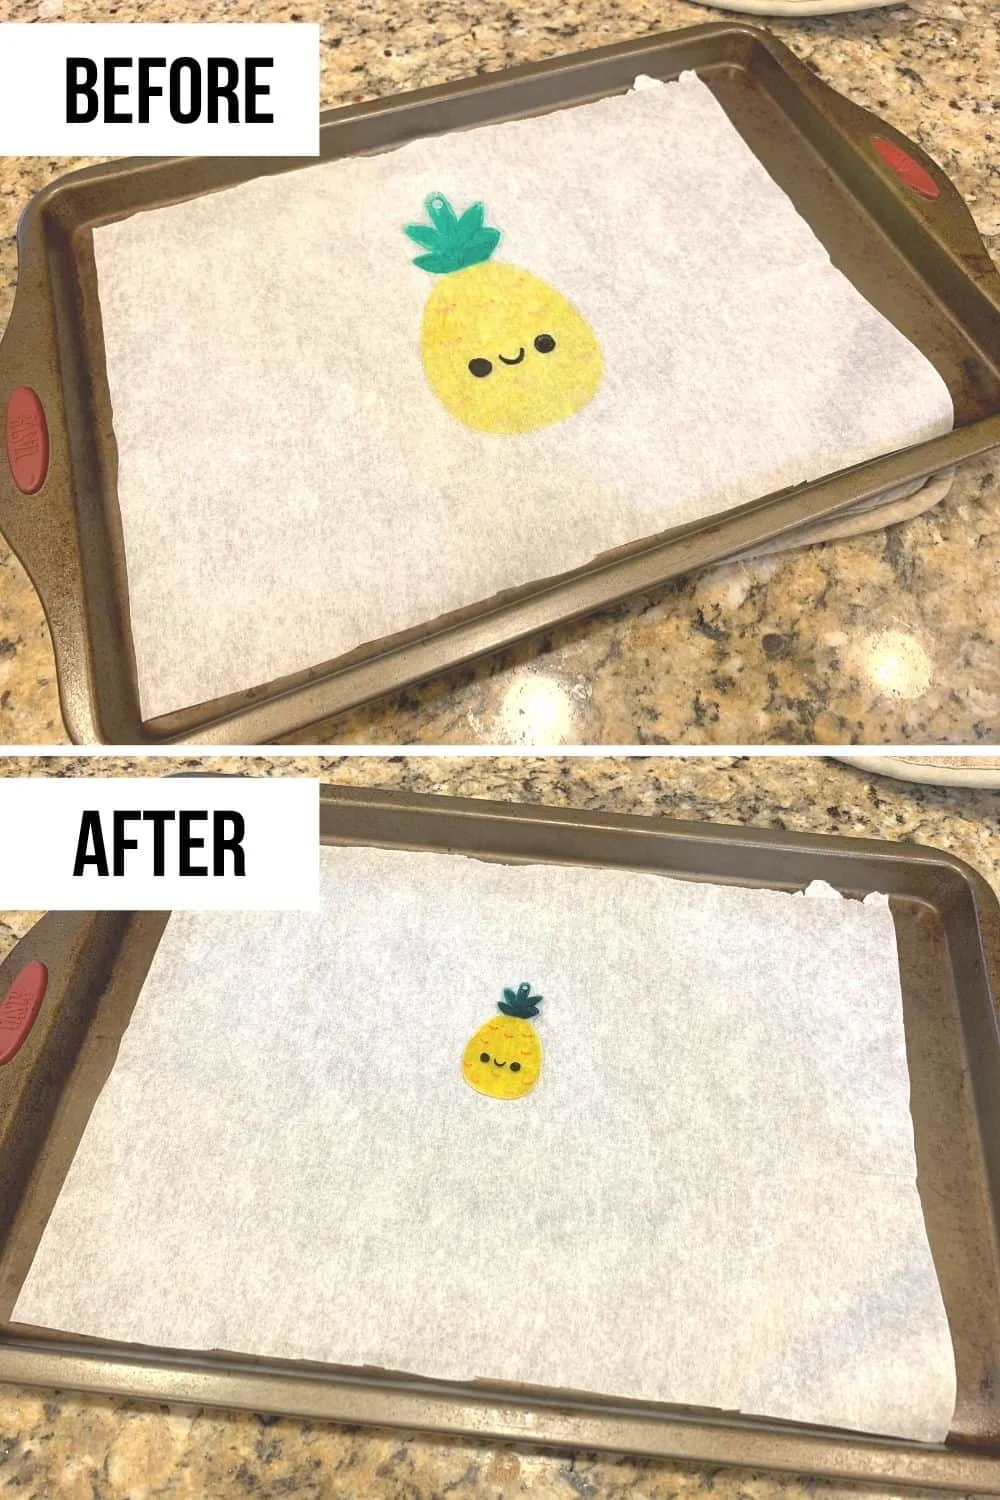 DIY Shrinky Dinks before and after applying heat